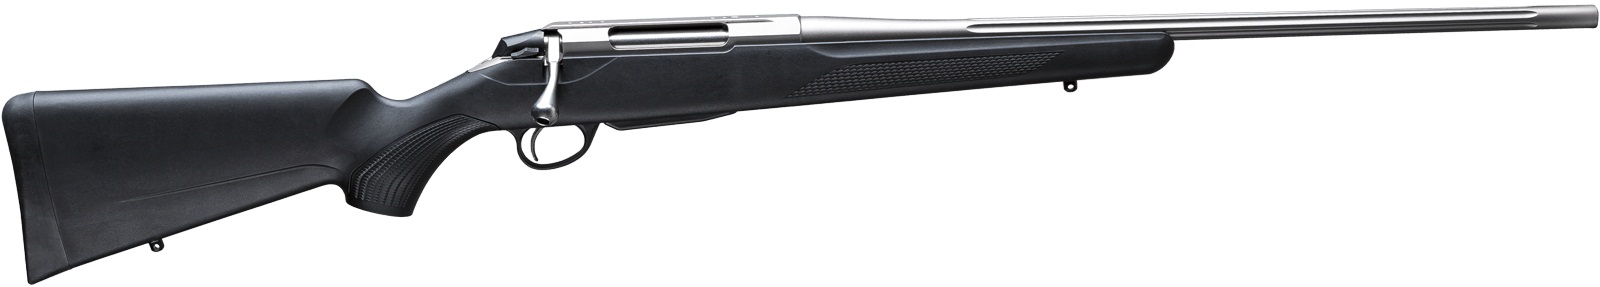 Нарезной карабин TIKKA Мод. T3x LITE SYNTHETIC STAINLESS FLUTED